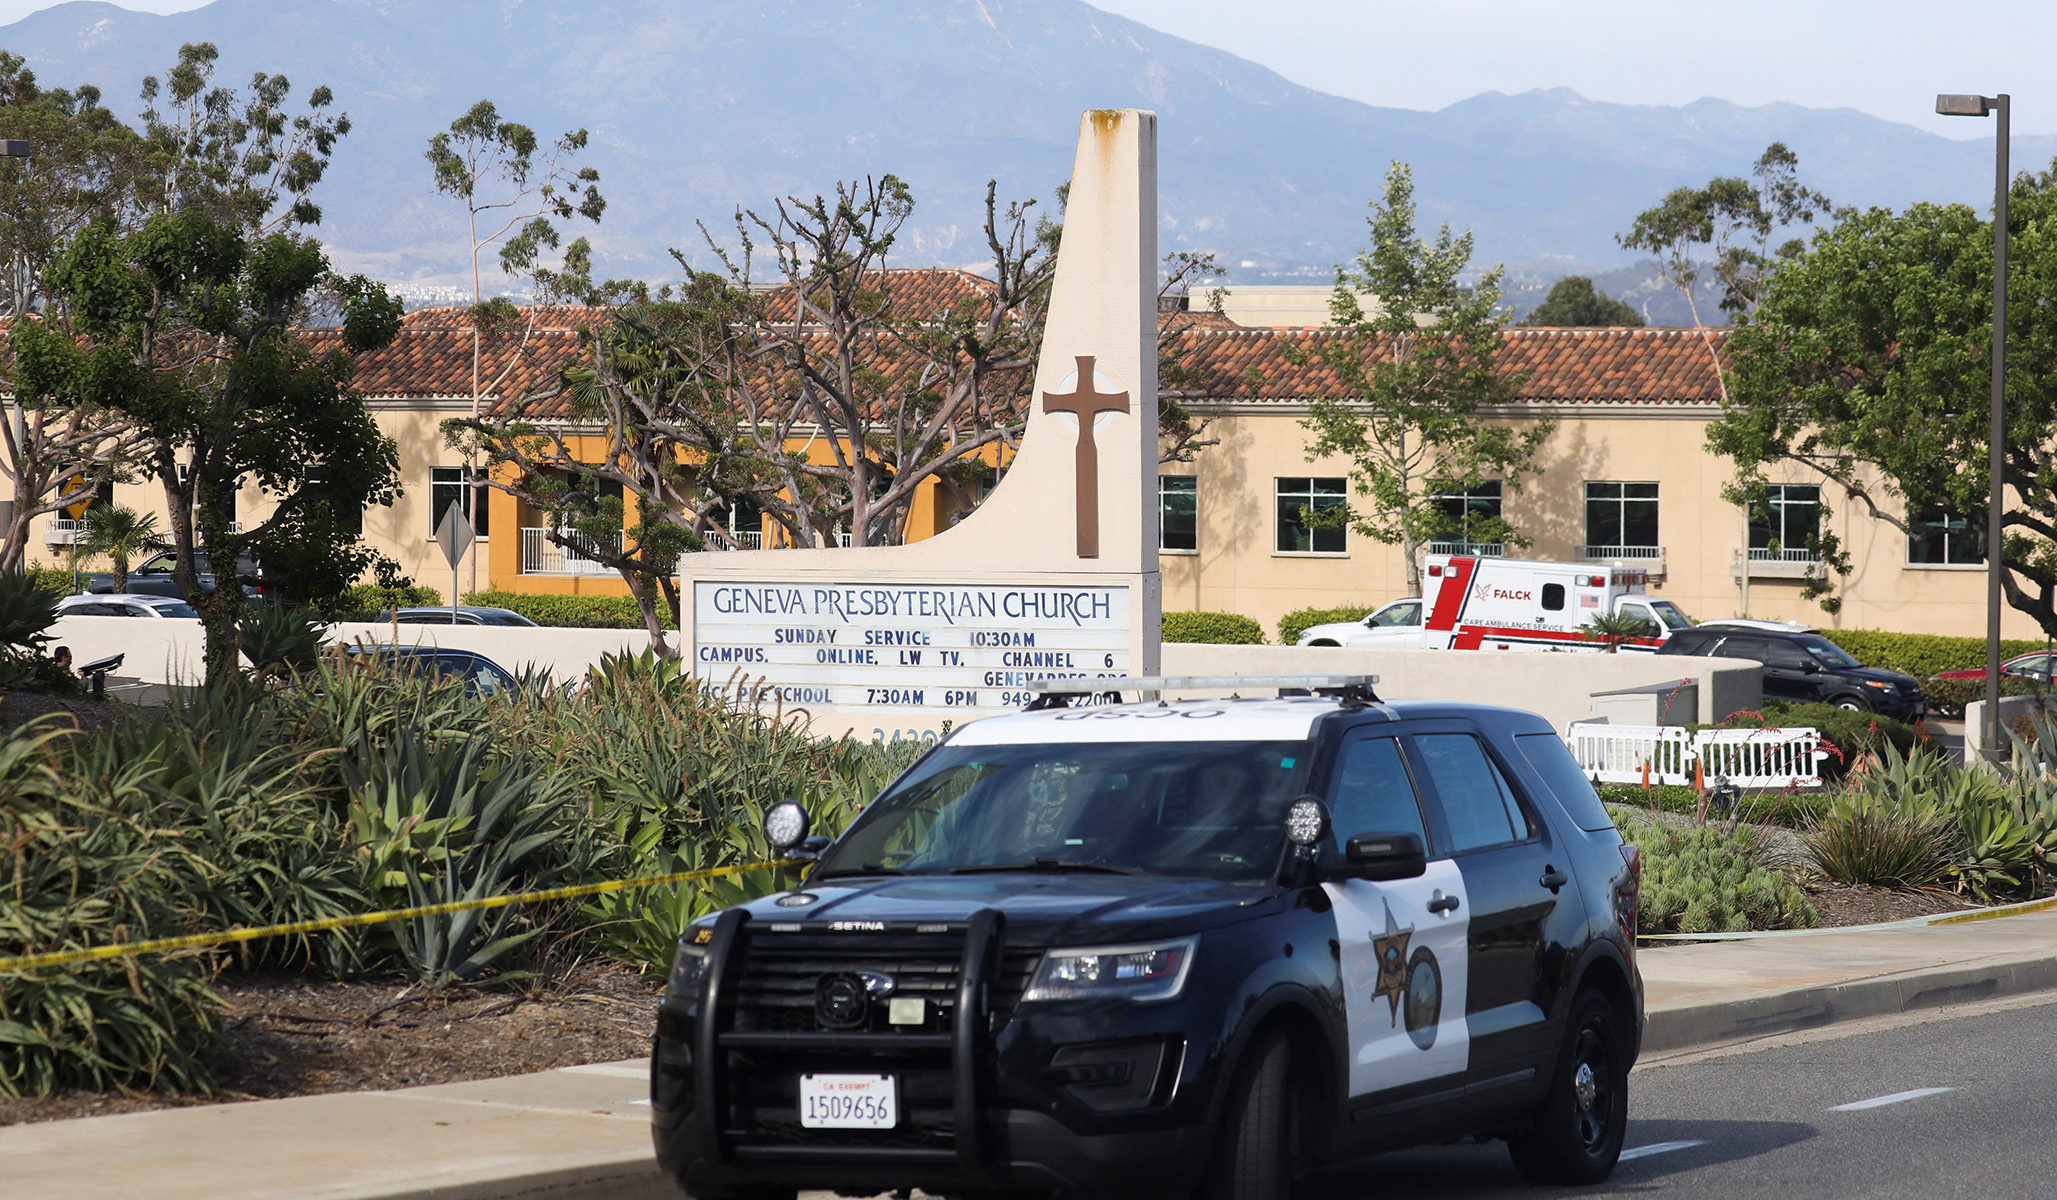 Suspect in California Church Shooting Motivated by Anti-Taiwan Sentiment, Police Say